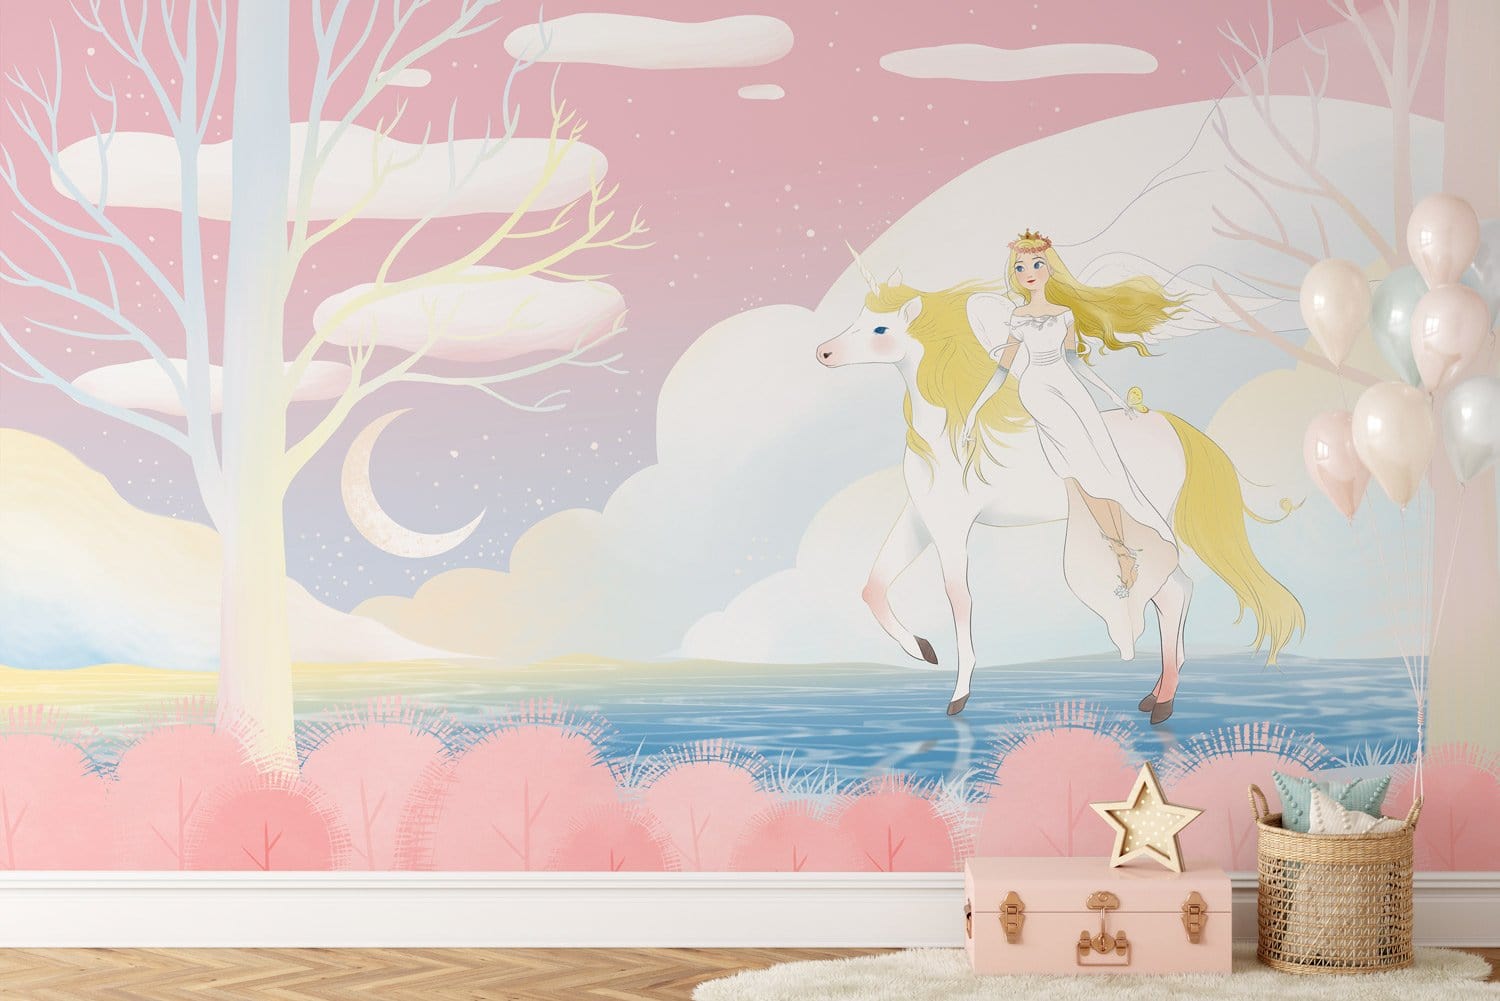 Wallpaper mural featuring a unicorn and other animals, perfect for decorating nurseries.